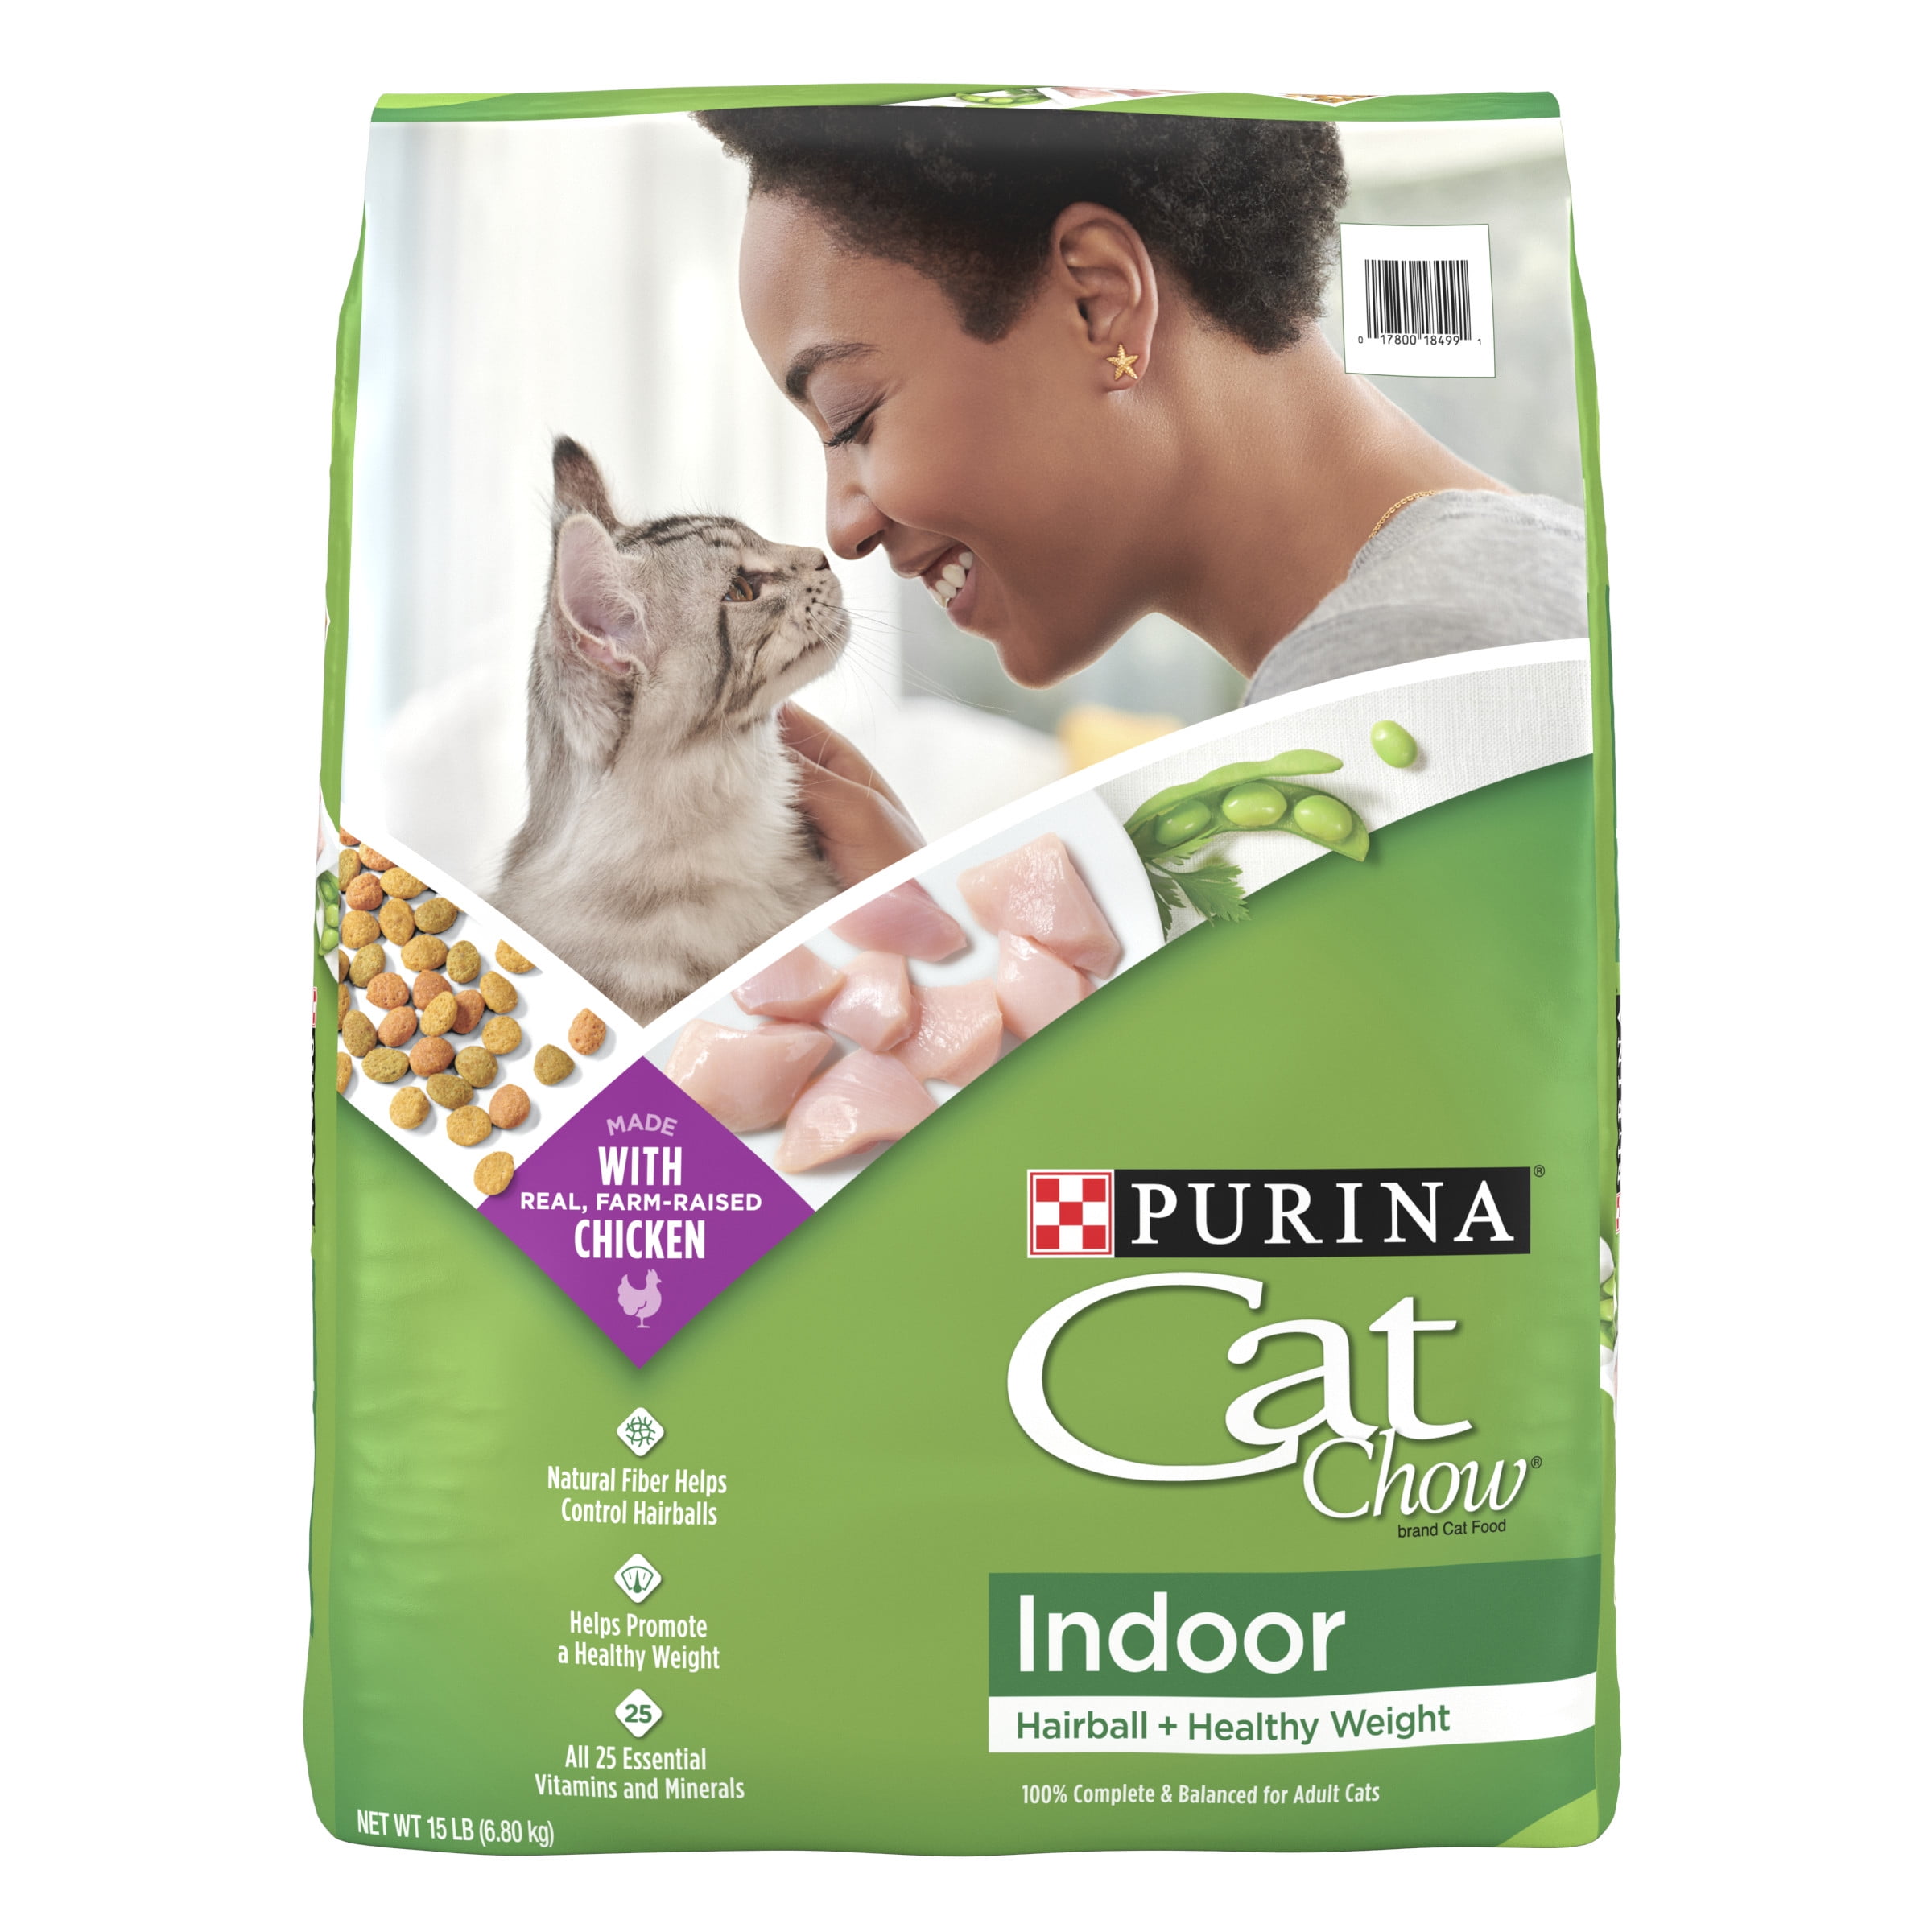 Purina Cat Chow Indoor Hairball & Healthy Weight Dry Cat Food, 15 lb Bag